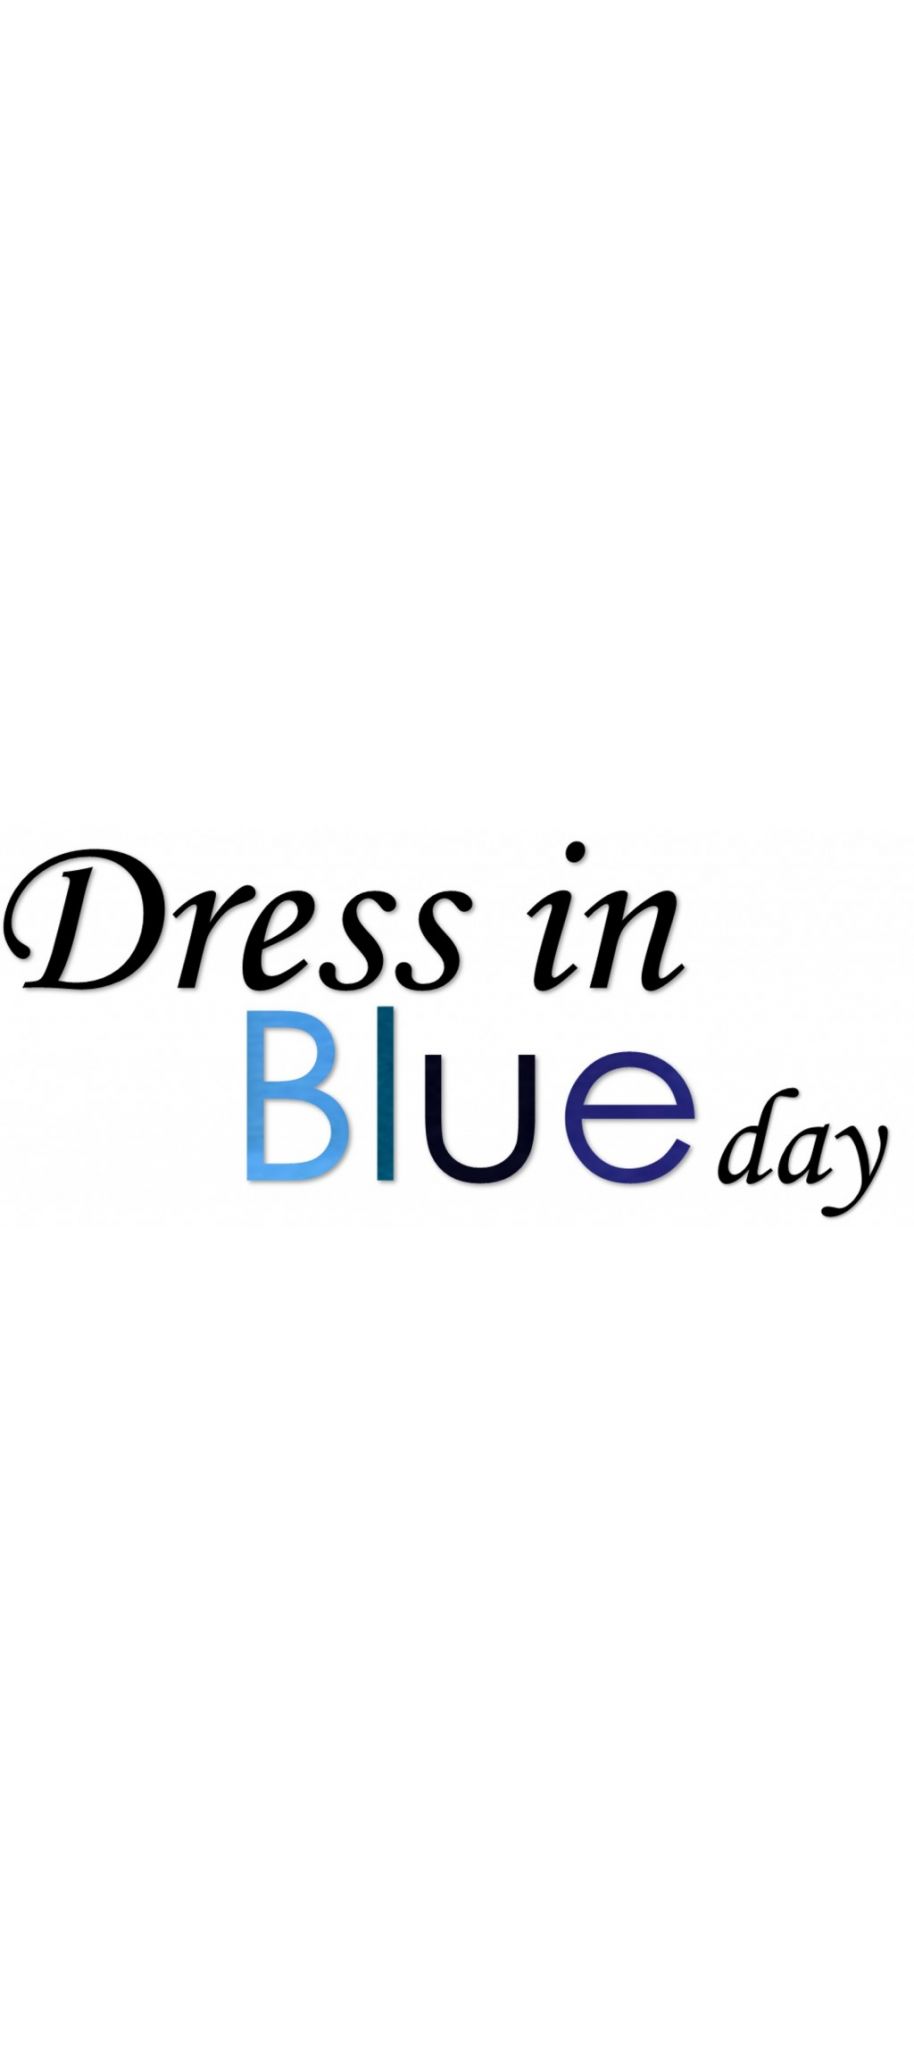 Blue Onesies for Dress in Blue Day 